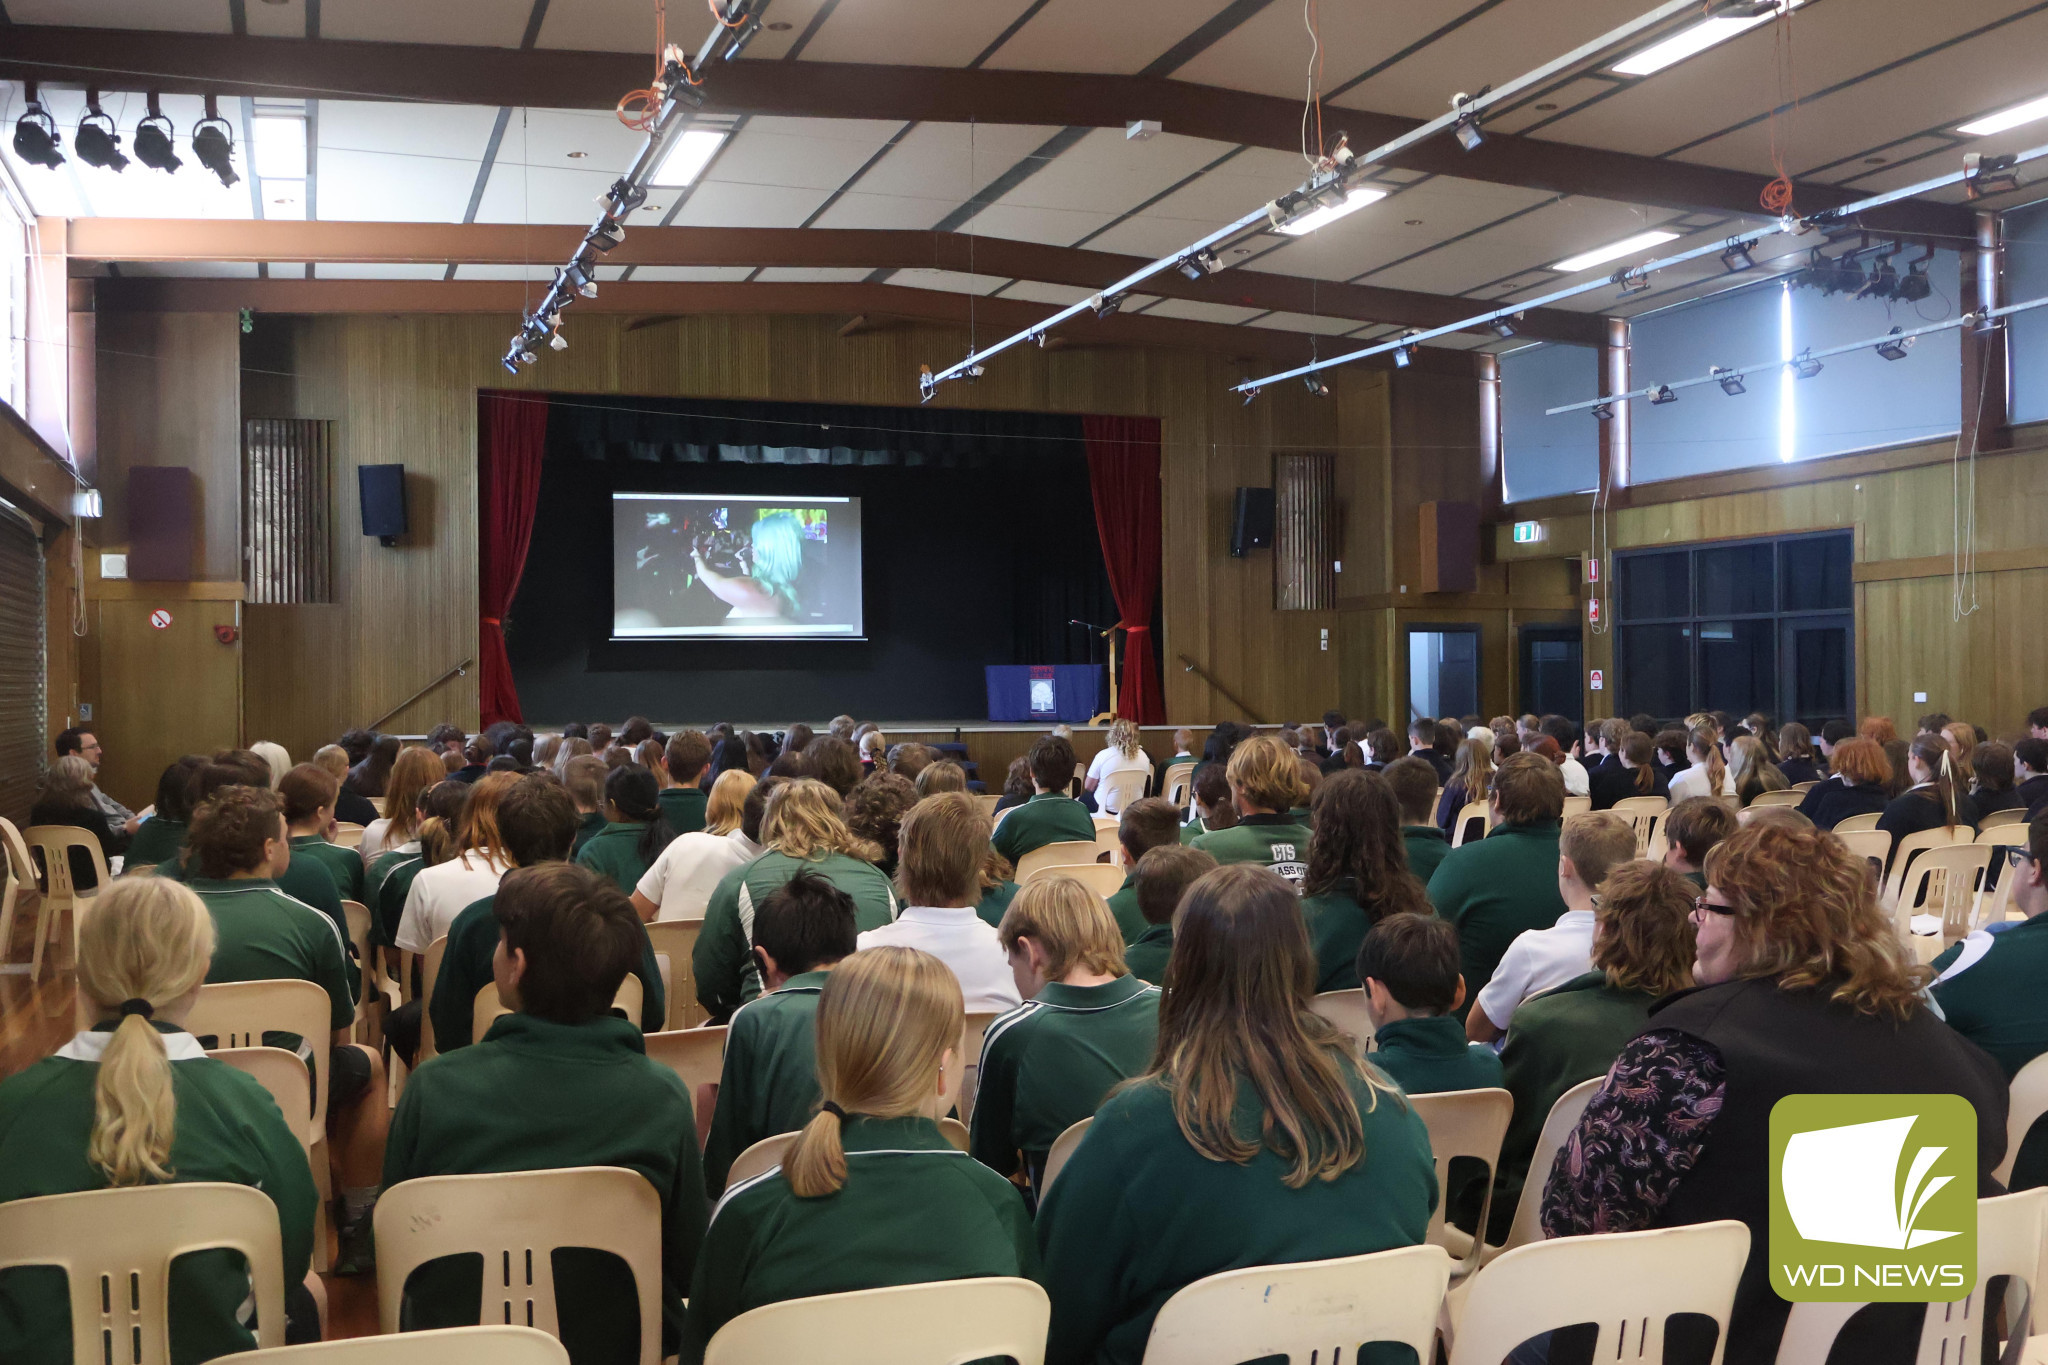 Embrace yourself: Students from Terang College, Mortlake College and Cobden Technical School united on the one campus last week to watch a documentary directed by 2023 Australian of the Year Taryn Brumfitt. The film explores the topics of body positivity and self-esteem.